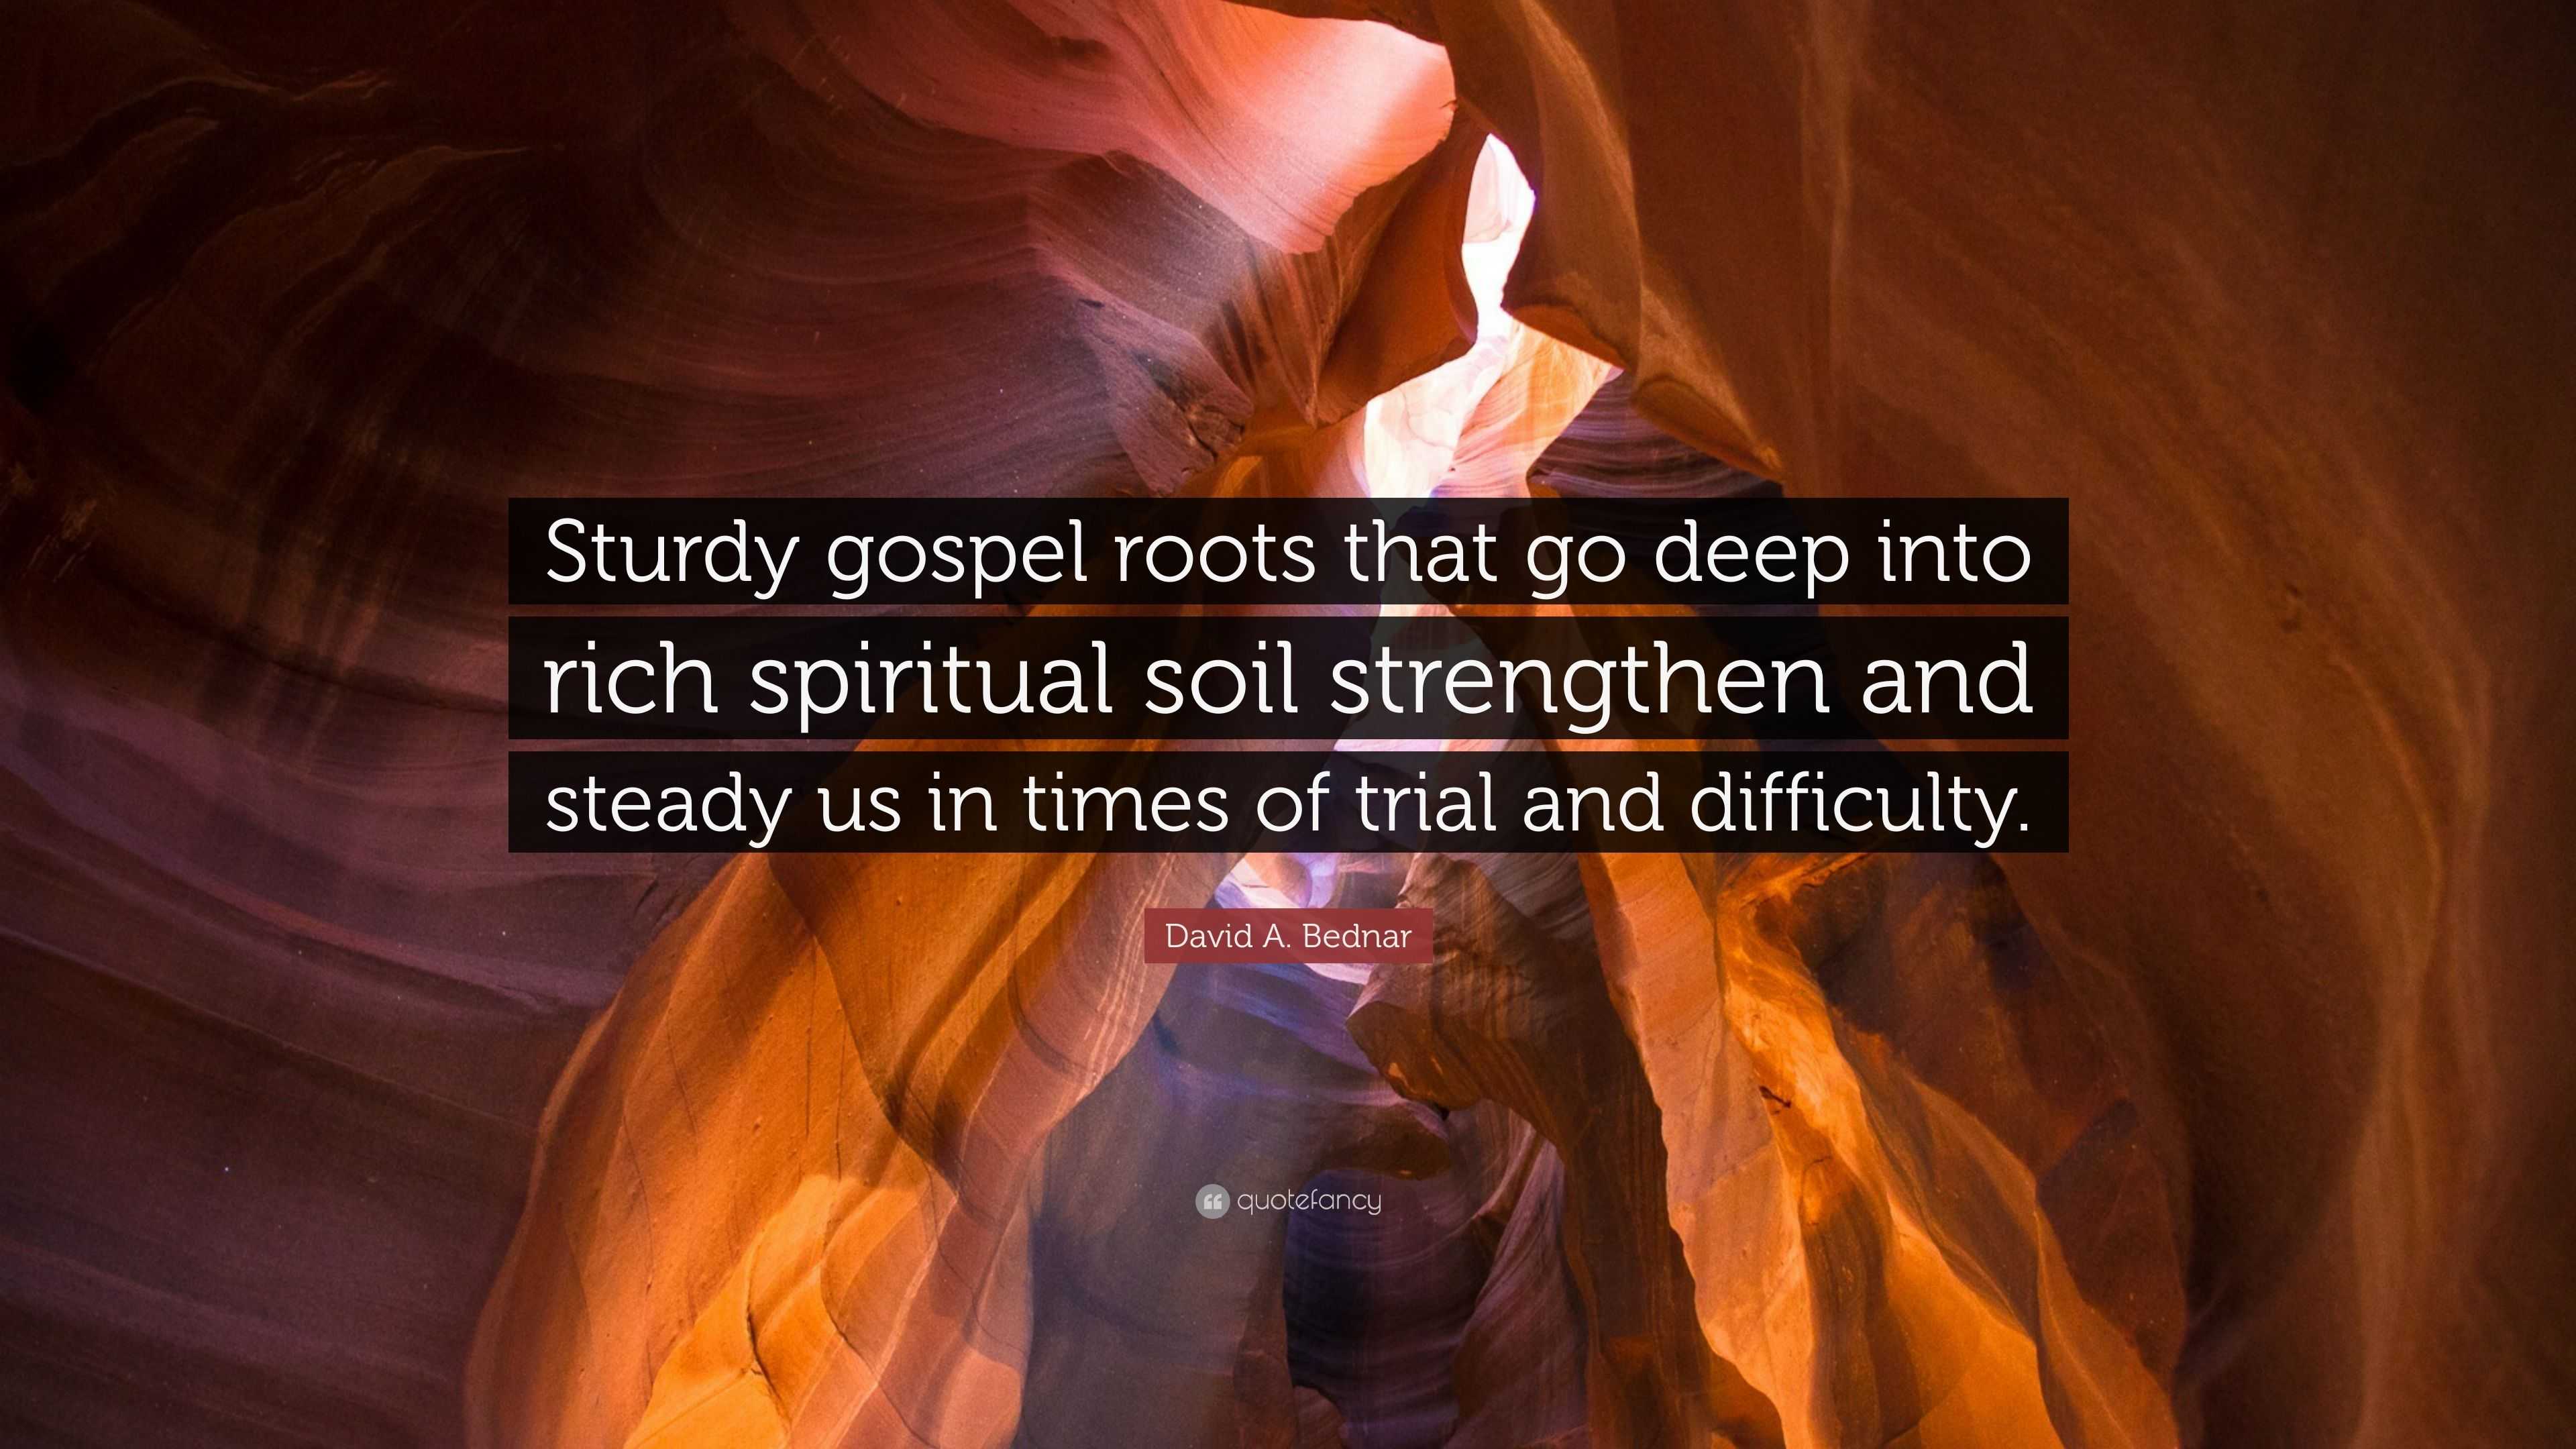 David A. Bednar Quote: “Sturdy gospel roots that go deep into rich